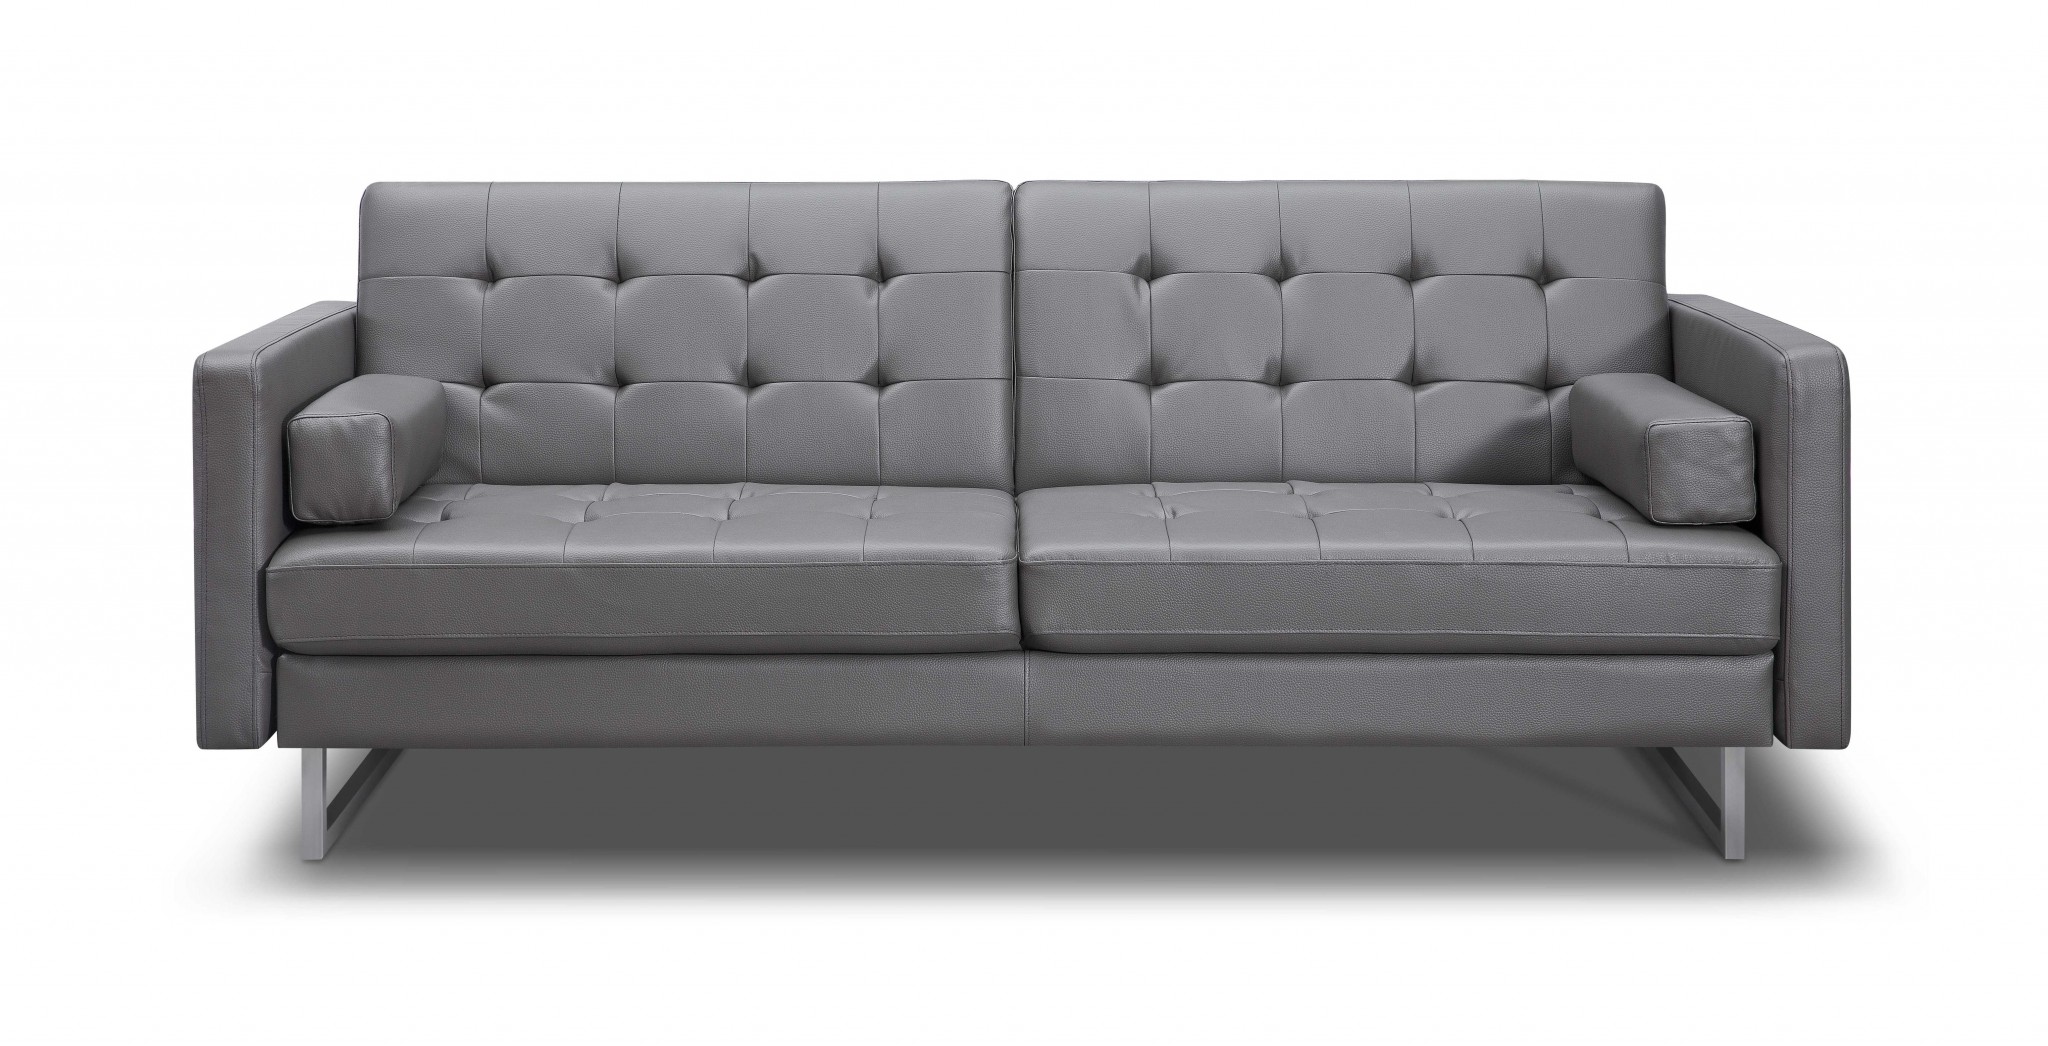 80" X 45" X 13" Gry Stainless Steel Sofa Bed